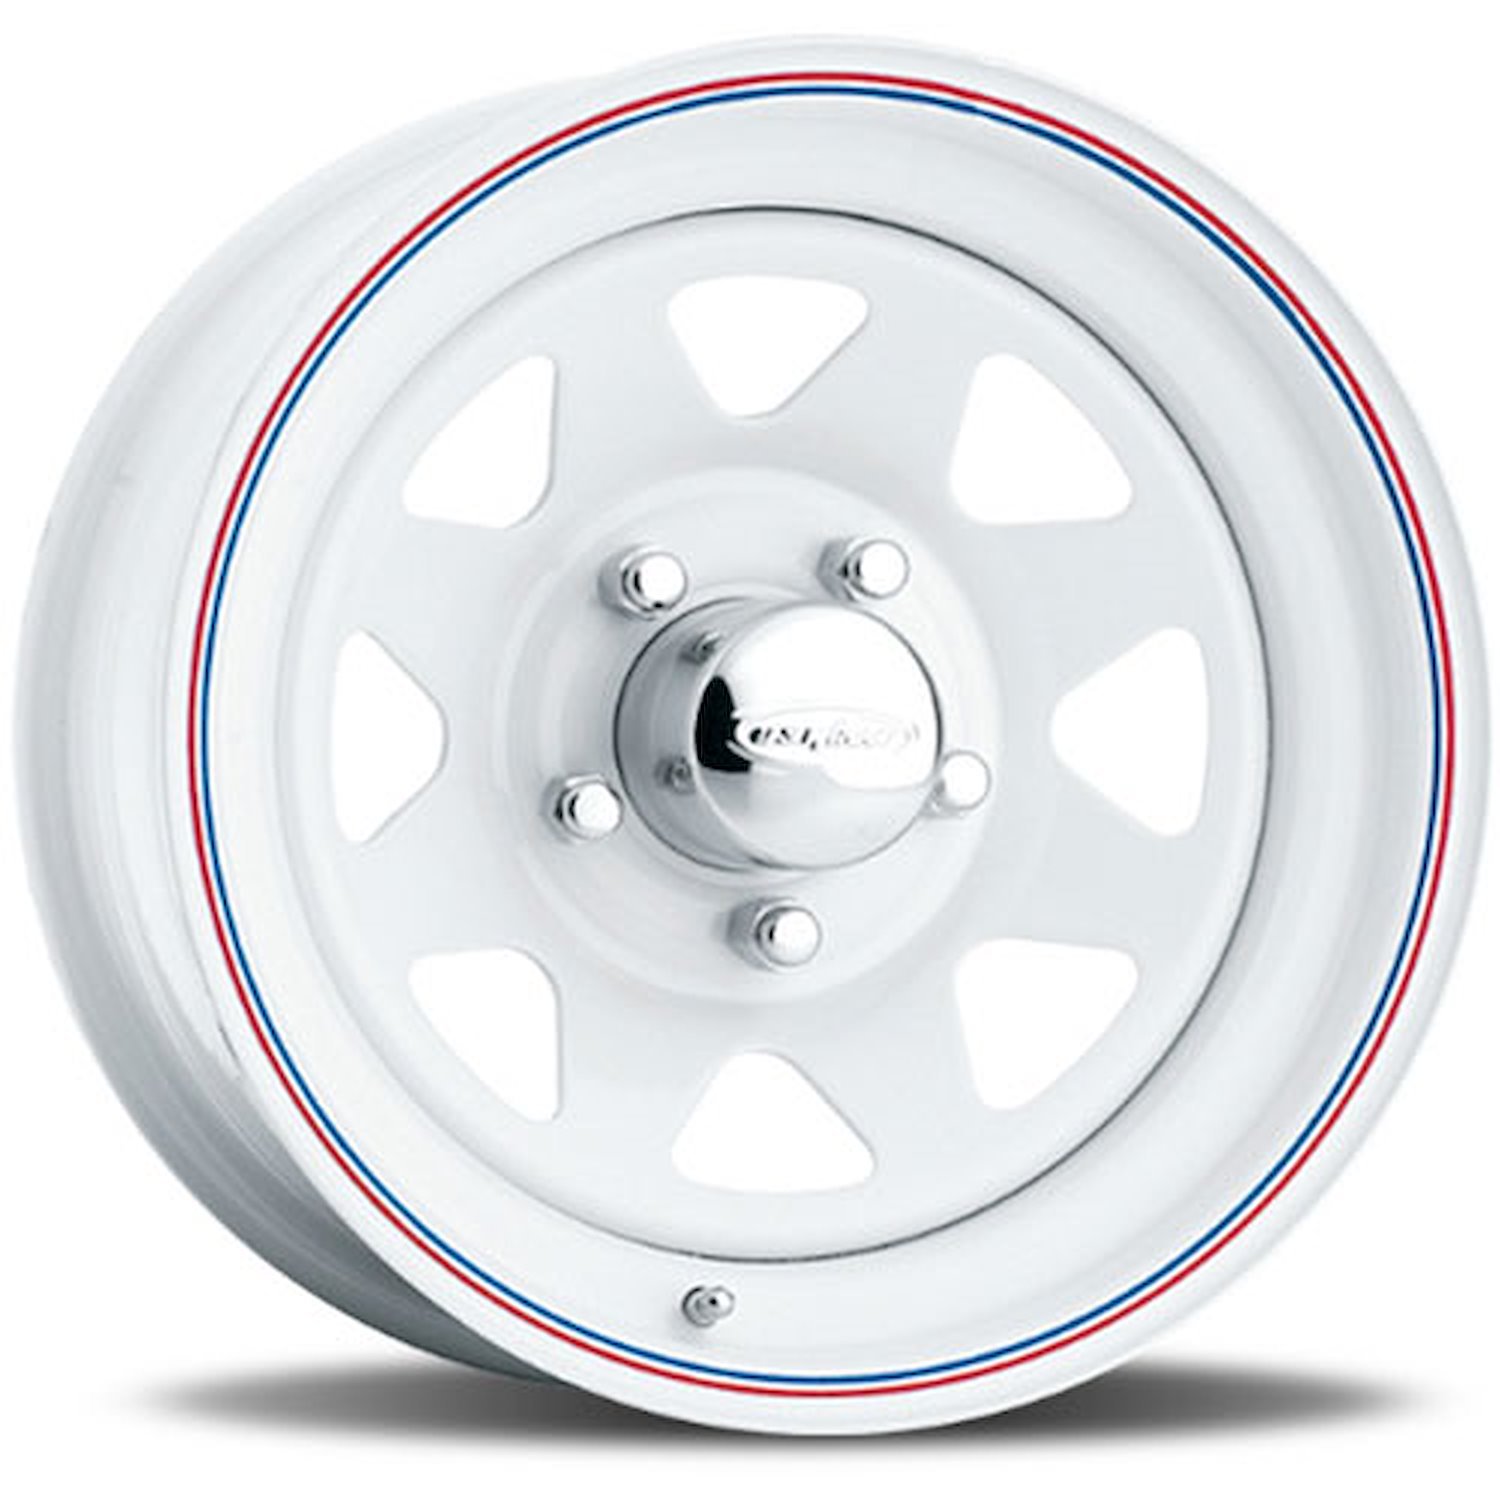 WHITE 8SPOKE 165 x 975 6 x 55 Bolt Circle 475 Back Spacing 22 offset 428 Center Bore 2000 lbs Load Rating